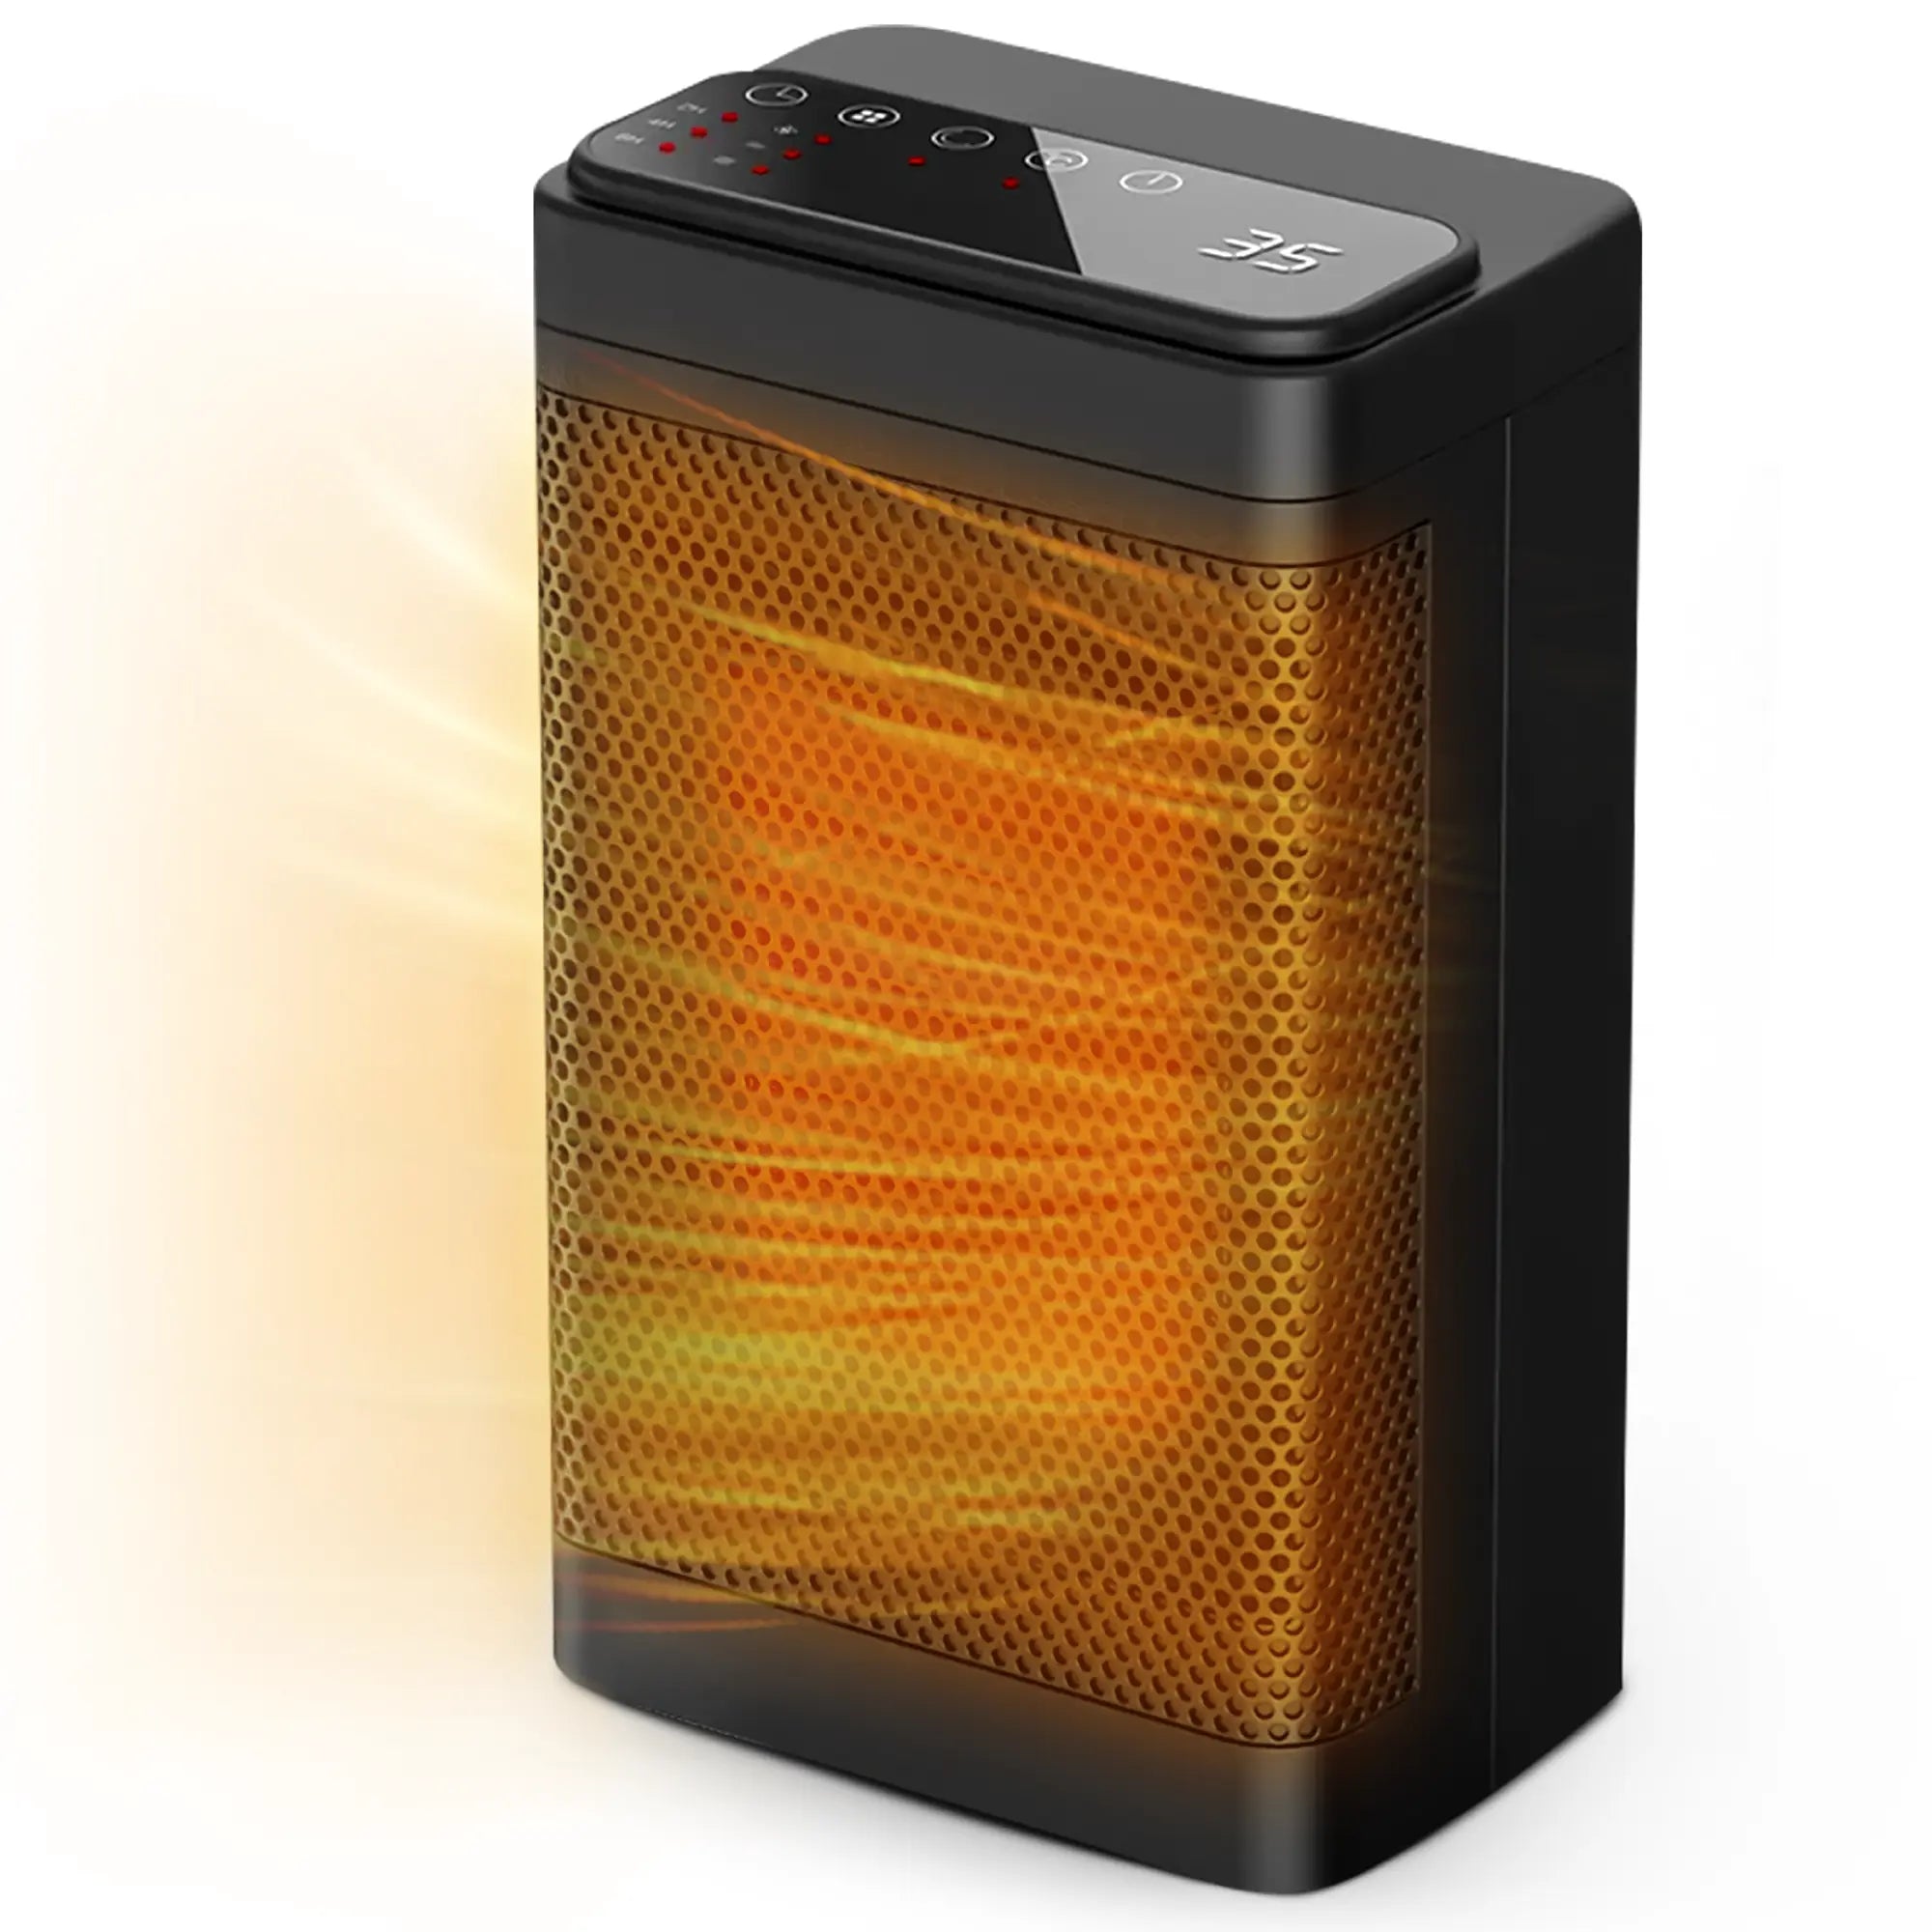 SunnyBreezy 1500W Heater | Portable Electric Heater with Thermostat